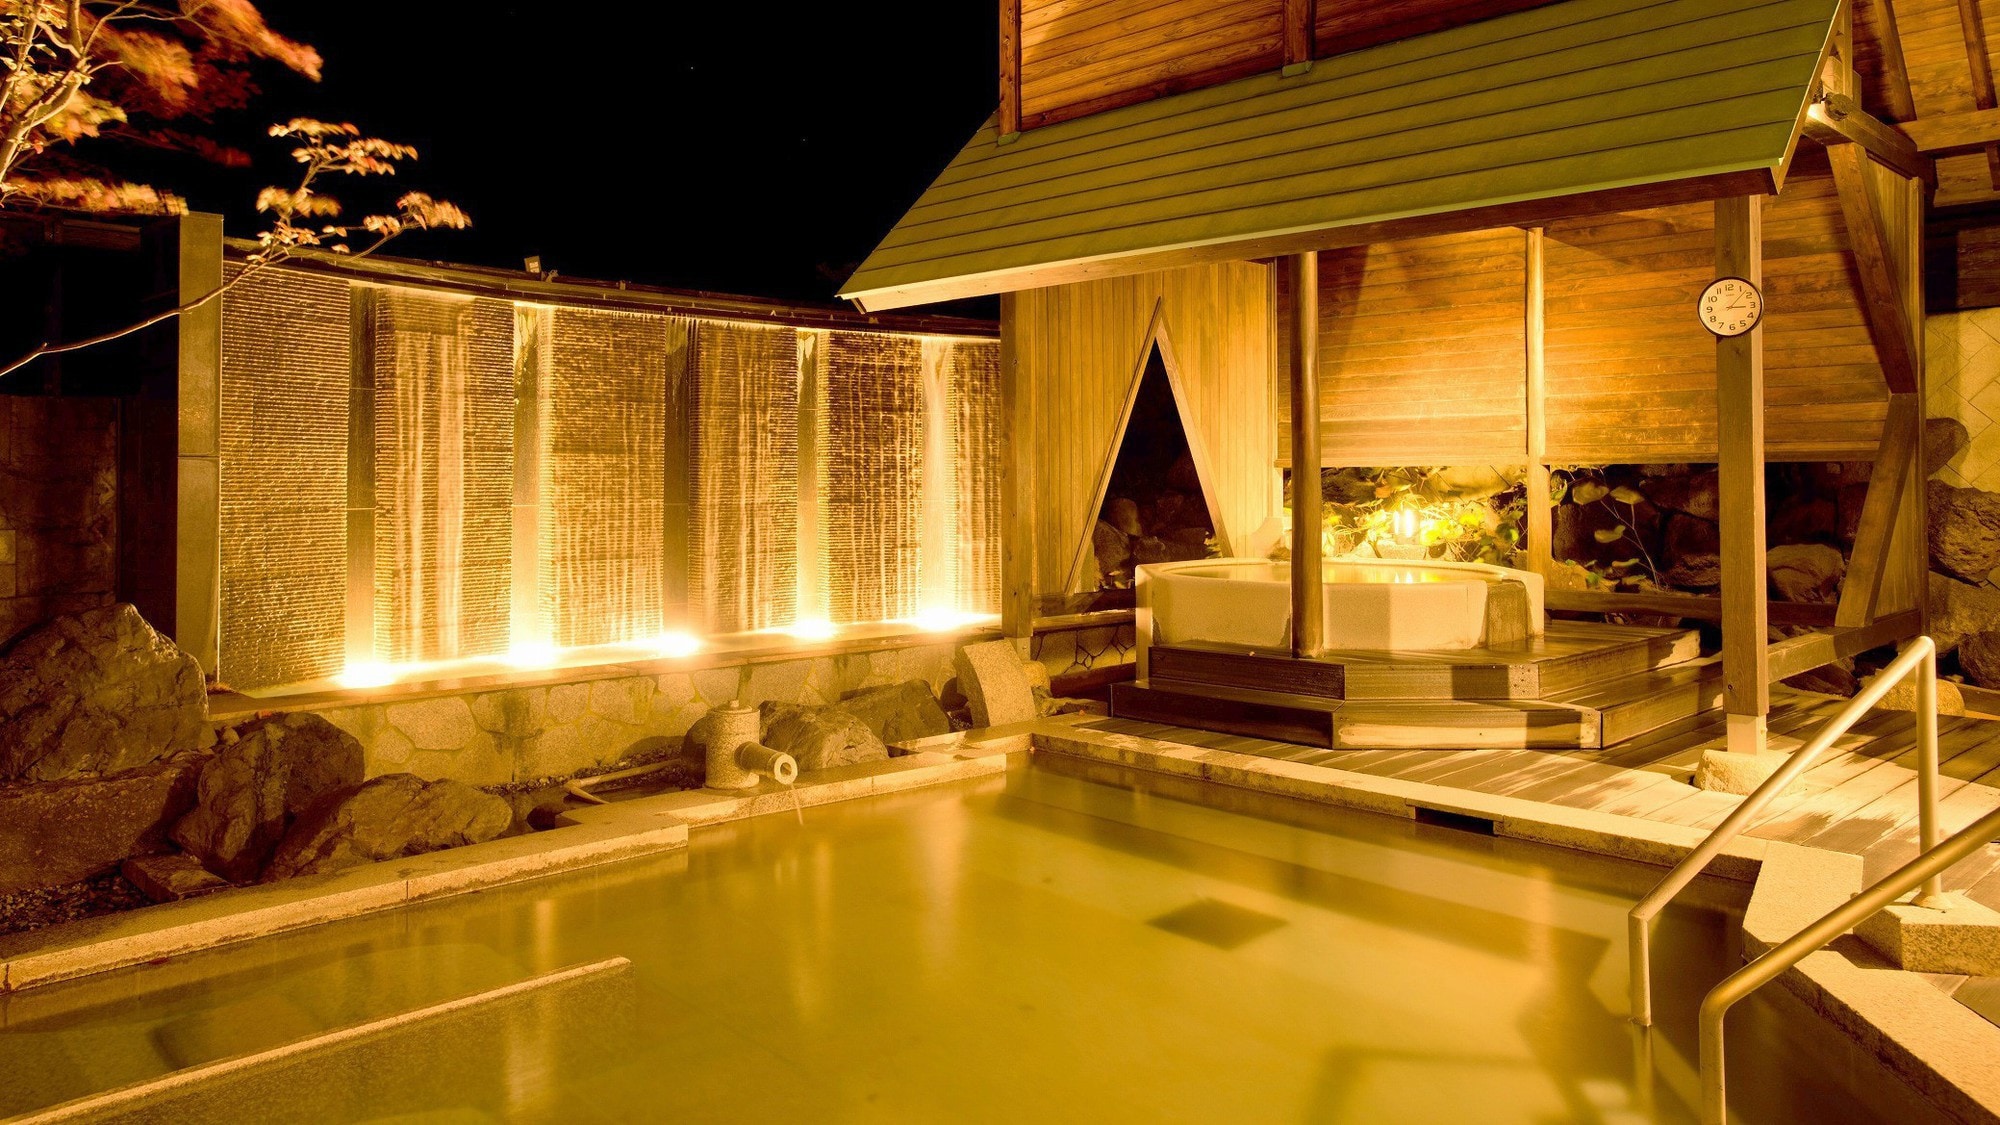 Please enjoy the open-air bath at night. Available all night.